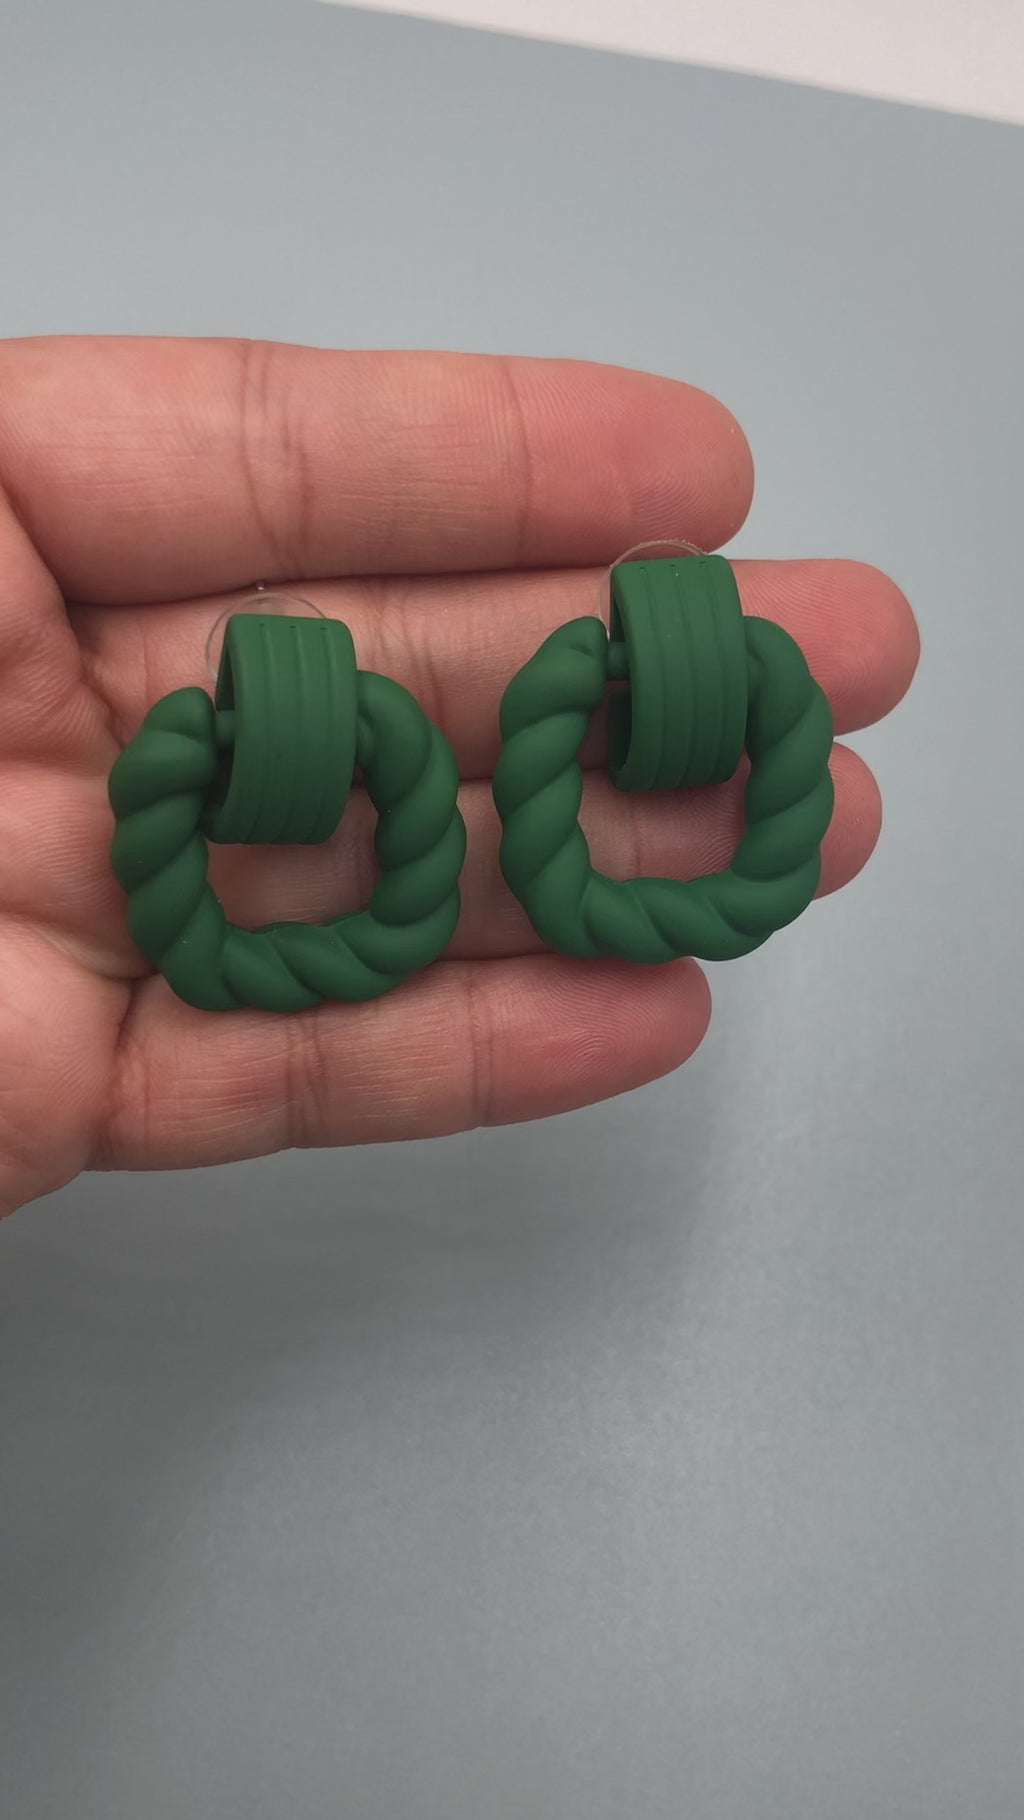 Women's drop earrings with a stunning dark green hue and twisted, modern design.